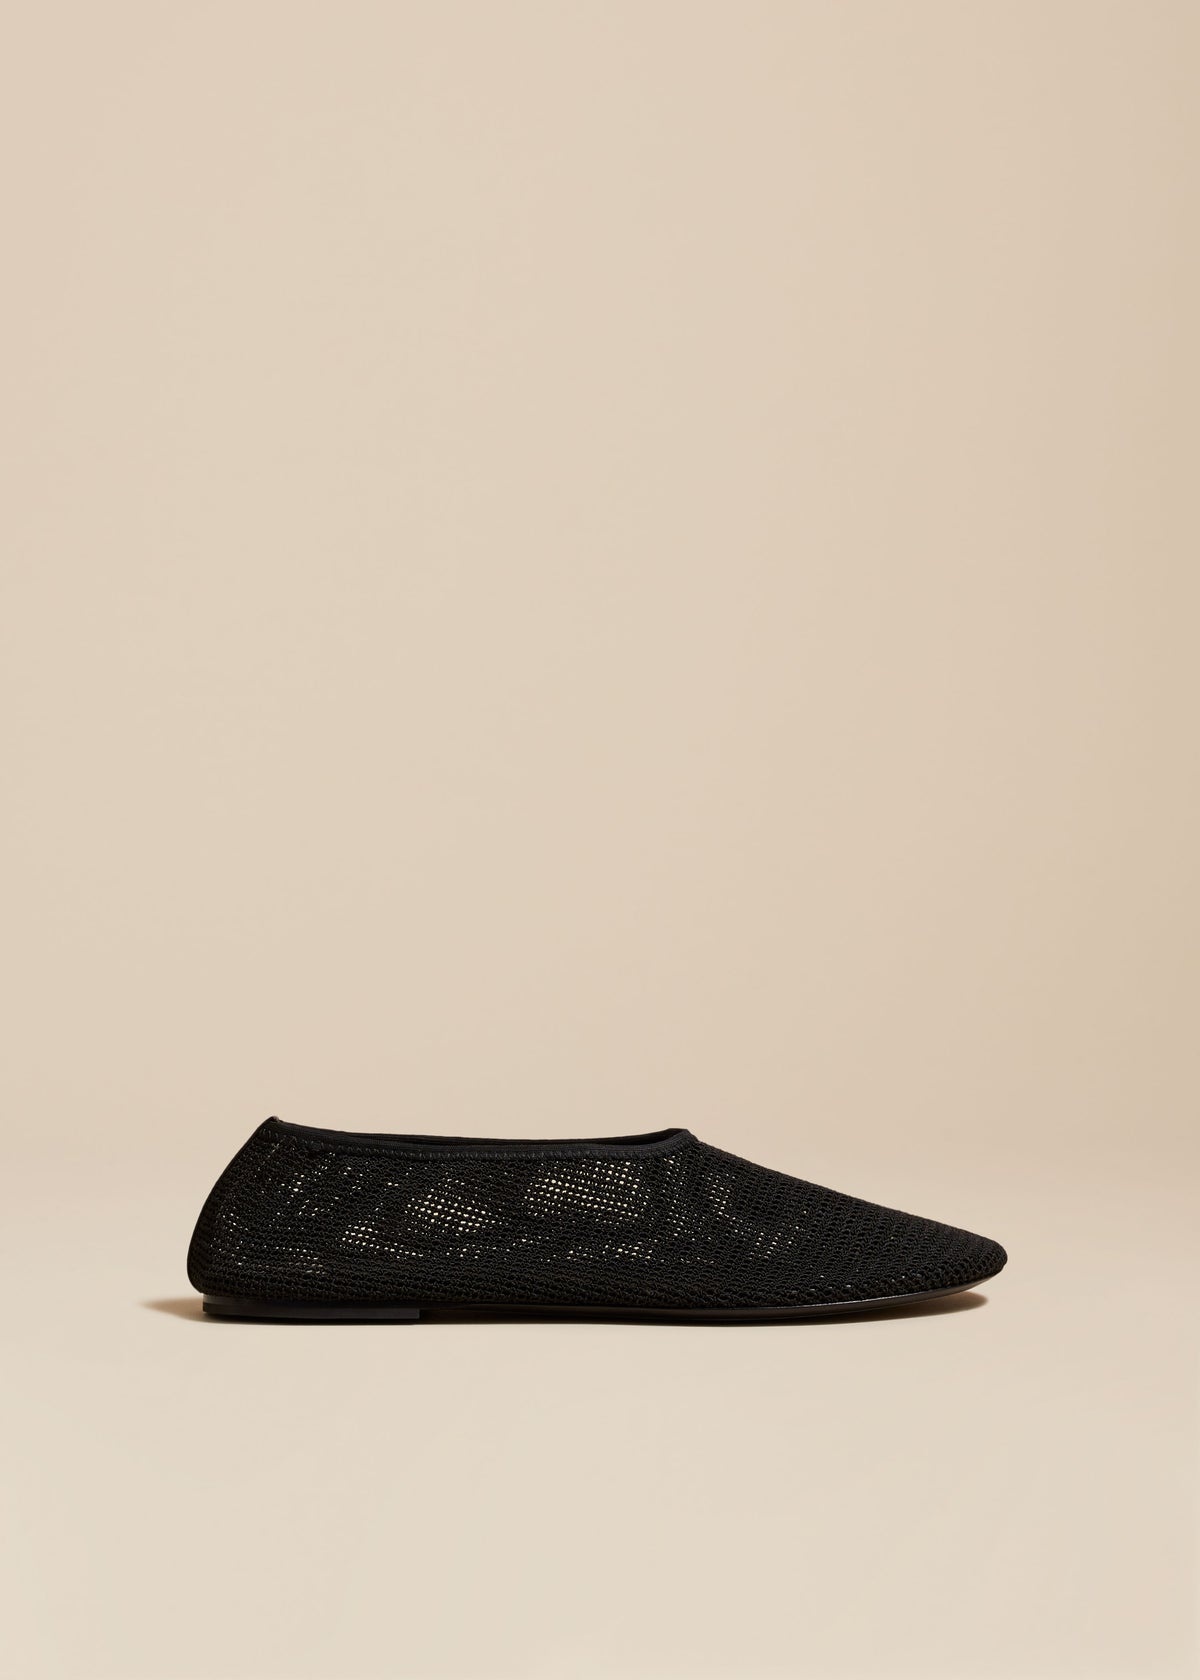 The Maiden Flat in Black - 1